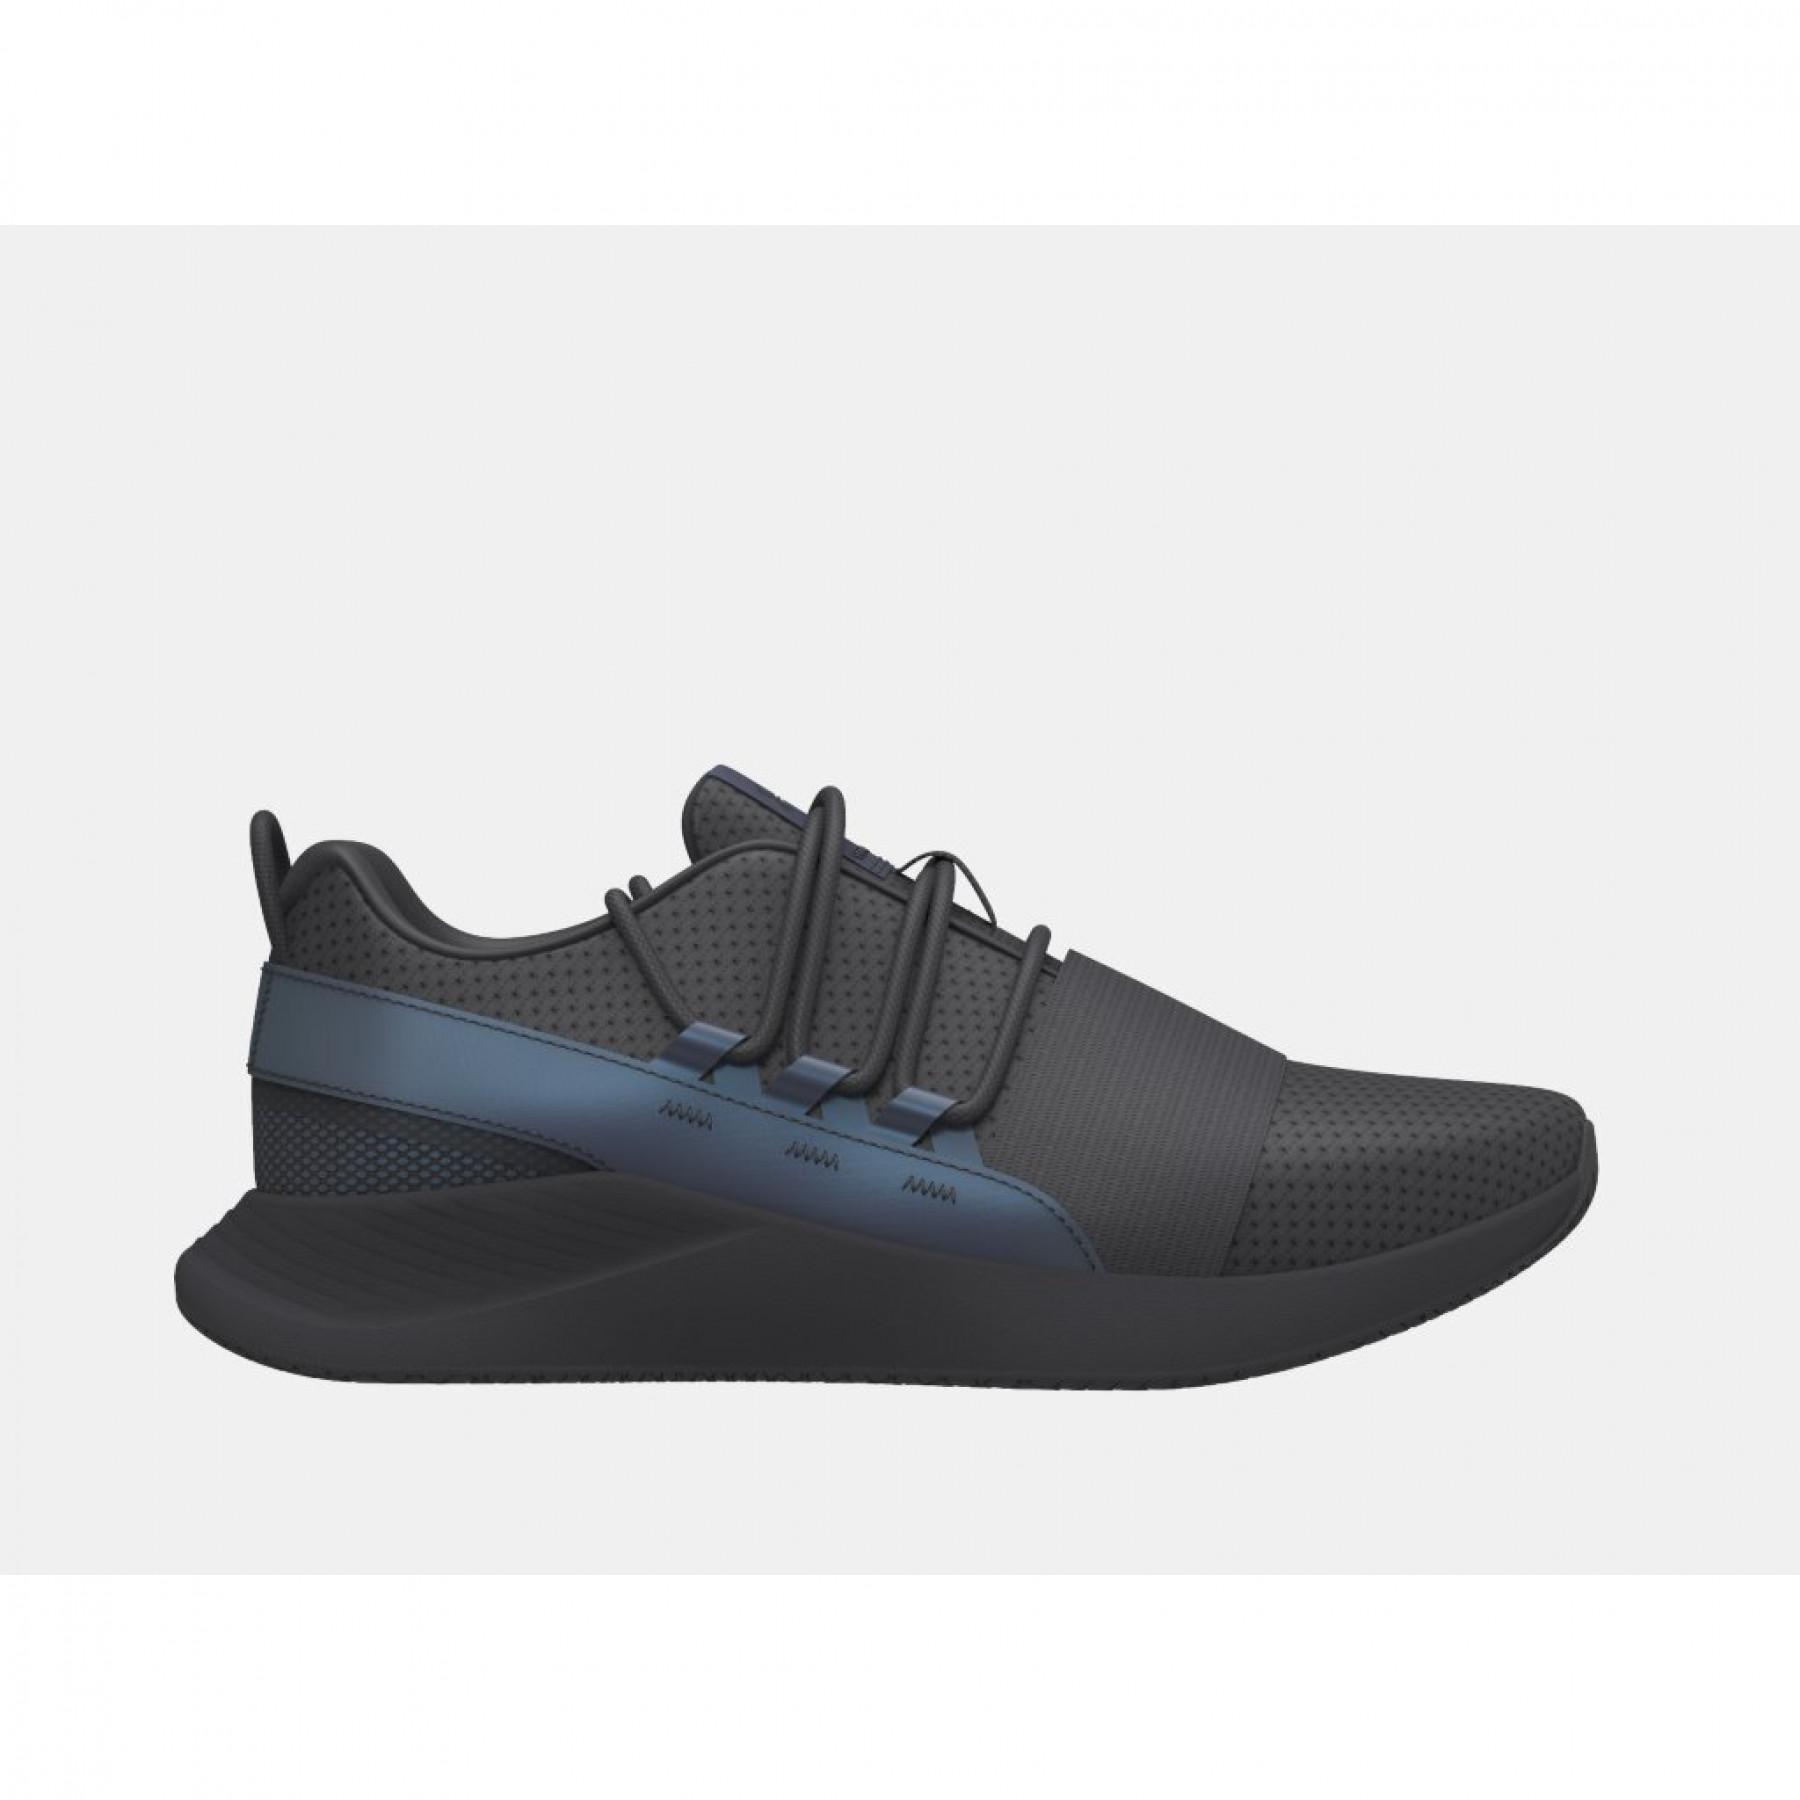 Women's sneakers Under Armour Charged Breathe OIL SLK